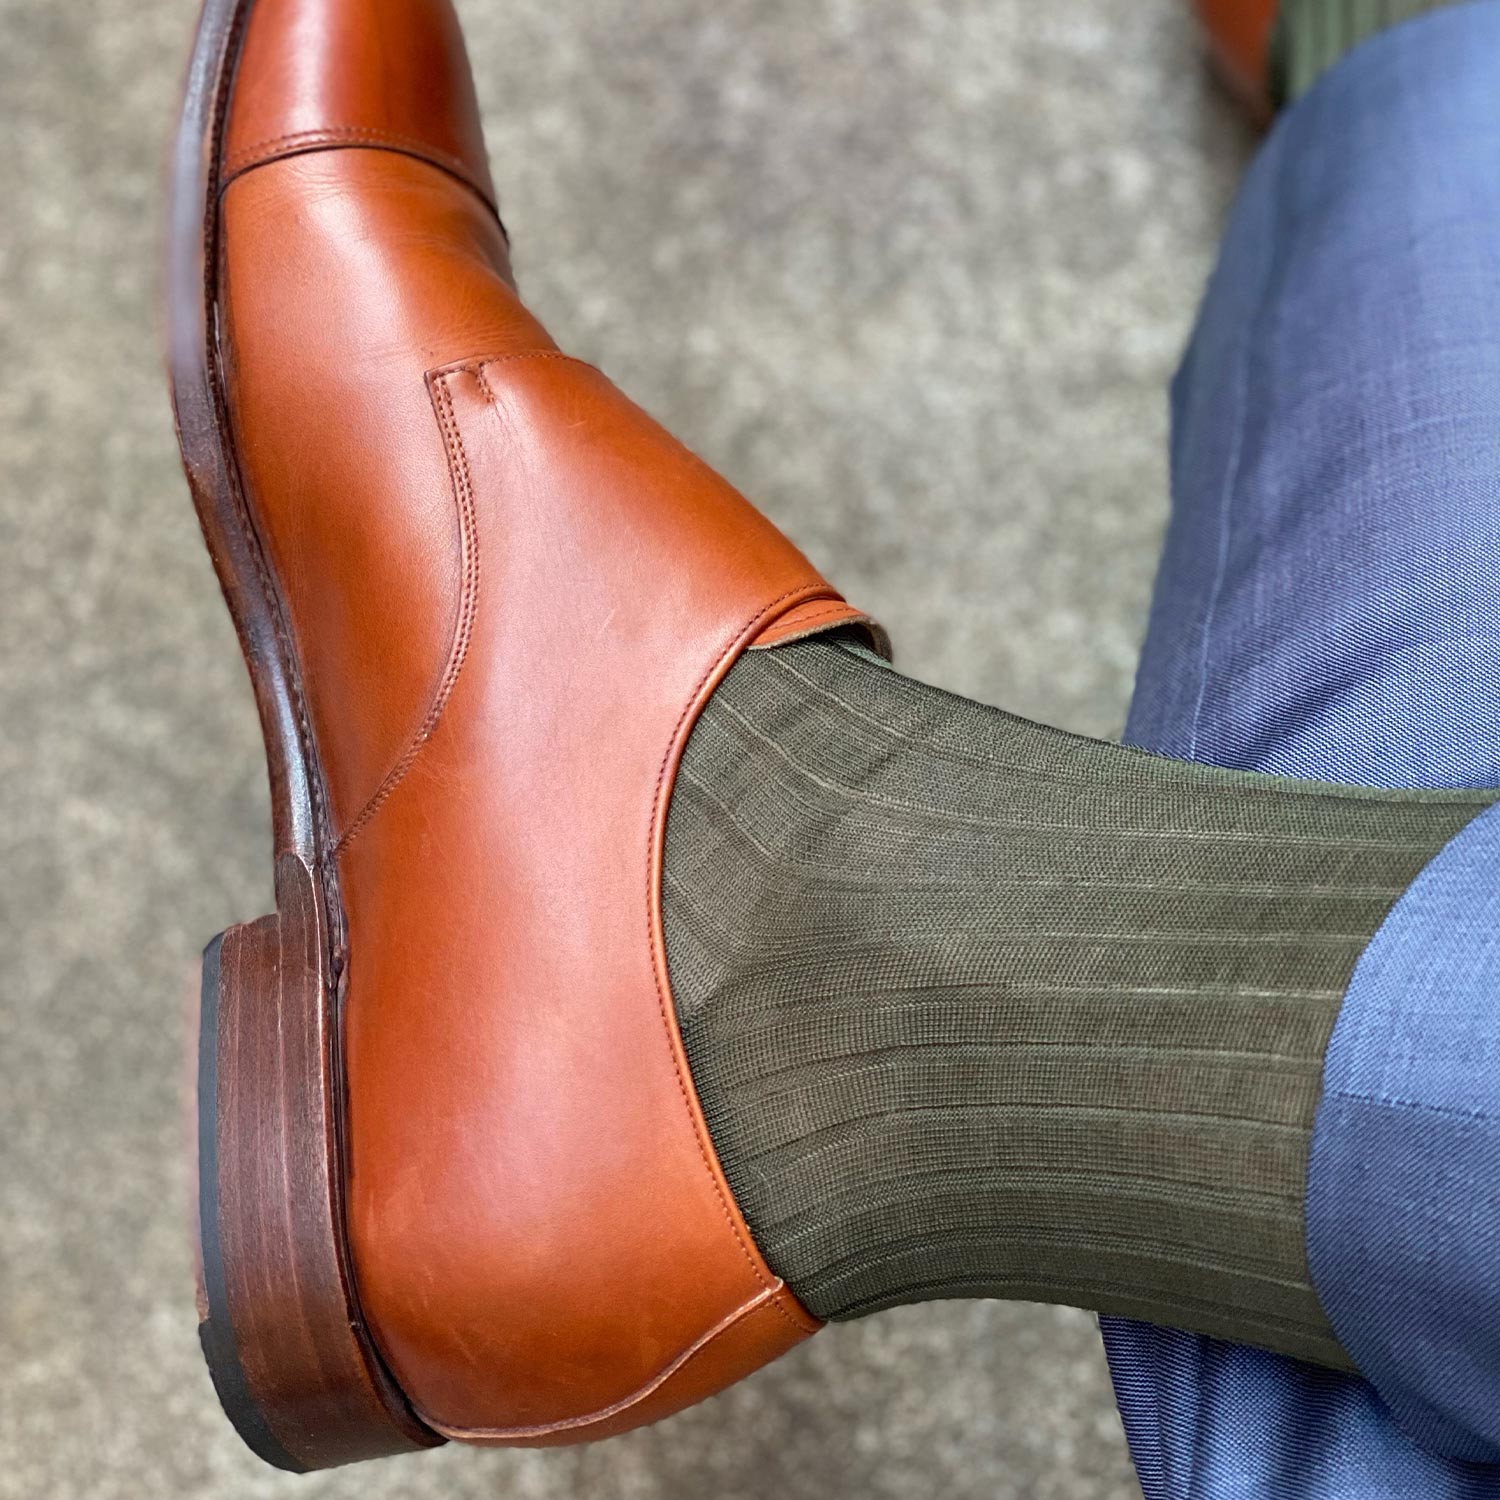 Olive Green dress socks paired with brown monks and blue trousers